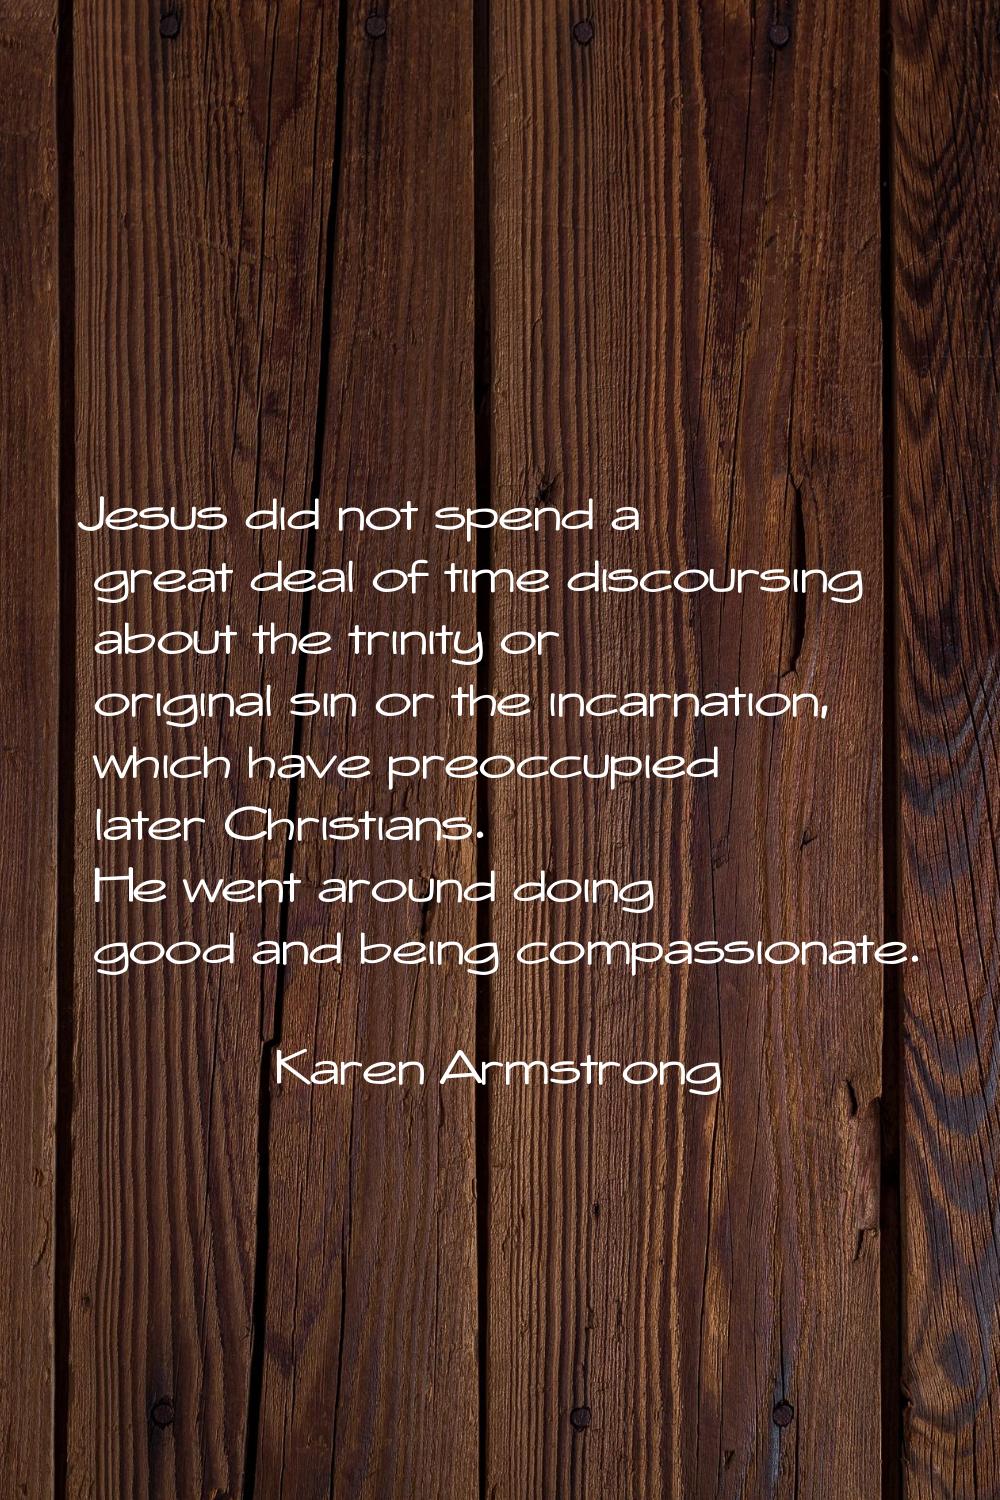 Jesus did not spend a great deal of time discoursing about the trinity or original sin or the incar